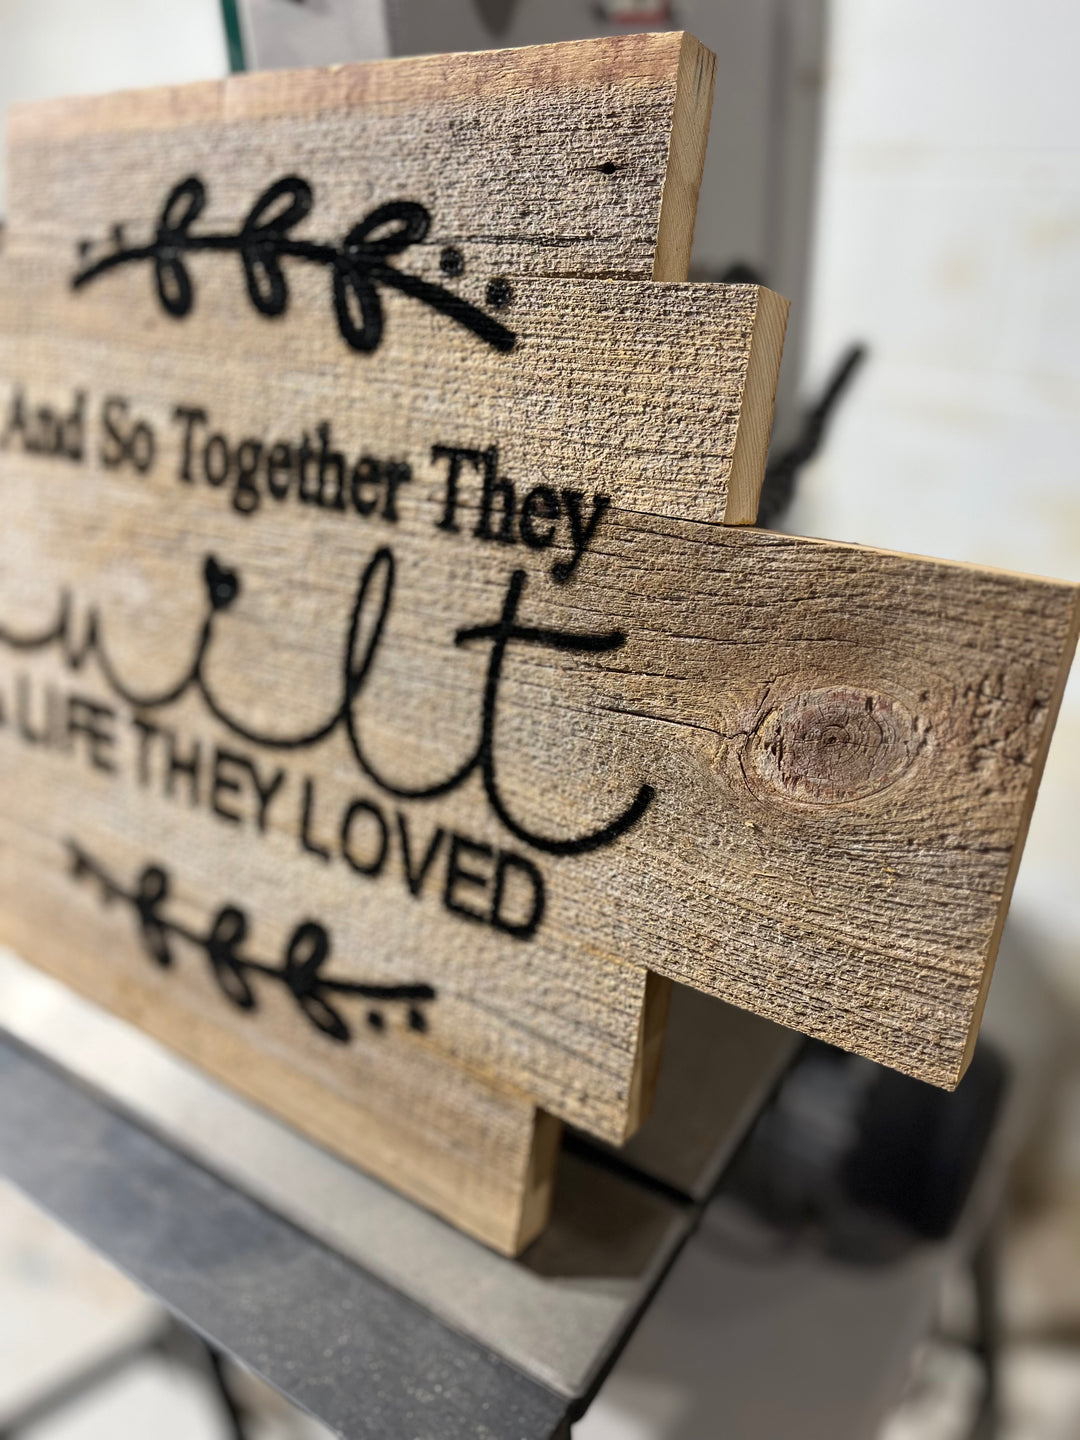 Built This Life Together Home Decor sign